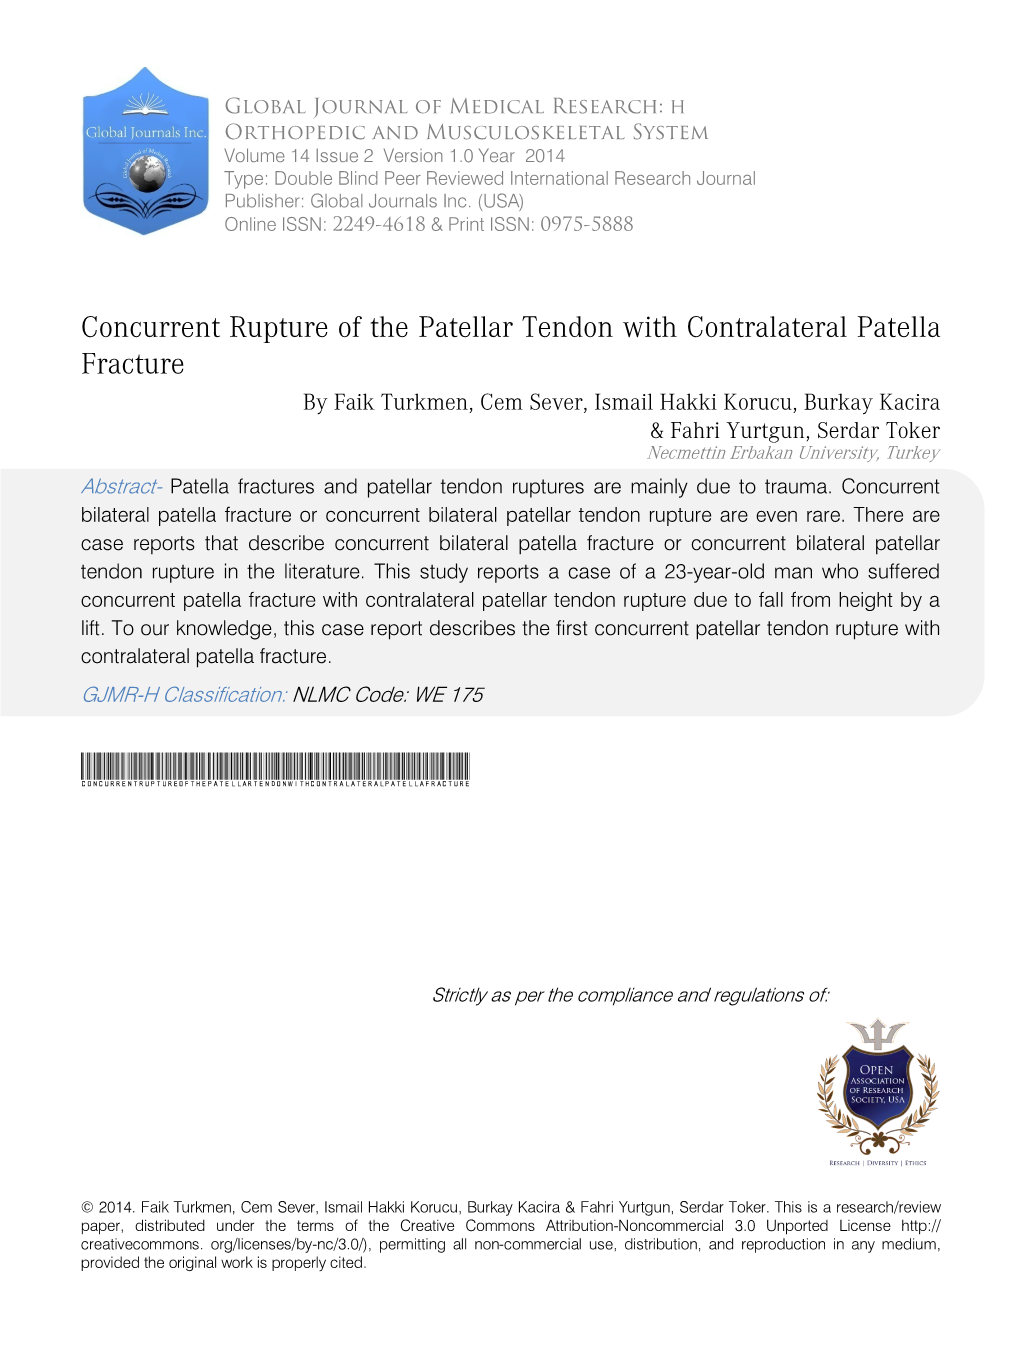 Concurrent Rupture of the Patellar Tendon with Contralateral Patella